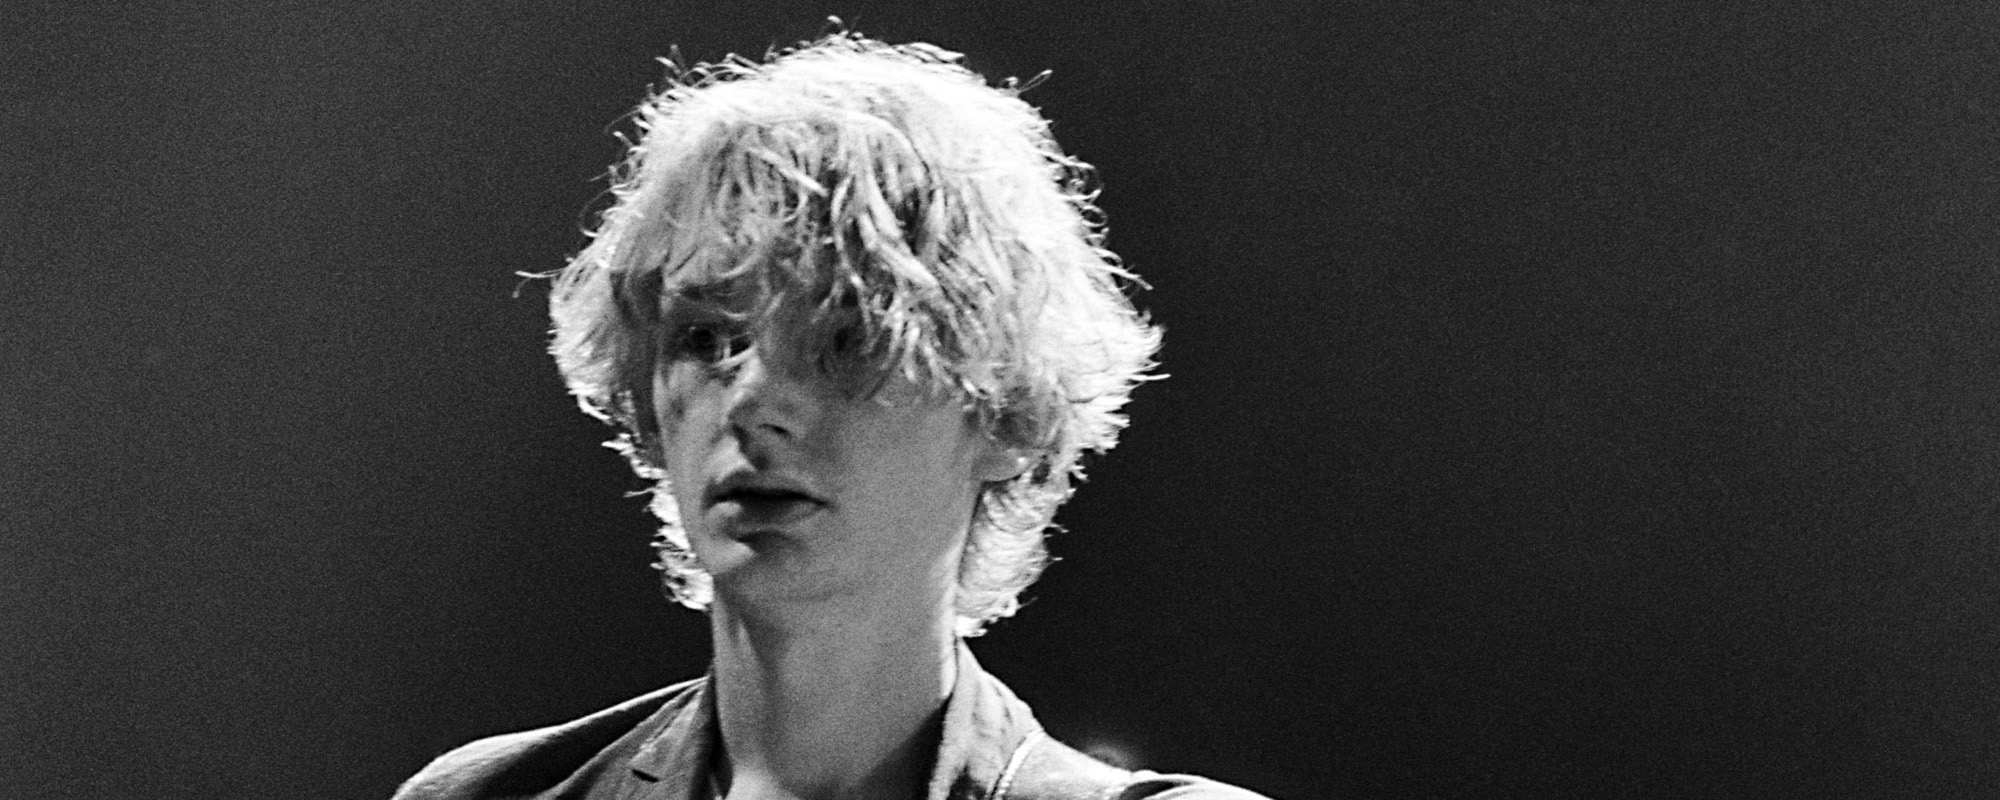 The Clash Co-Founder and Public Image Ltd. Guitarist, Keith Levene, Dead at 65